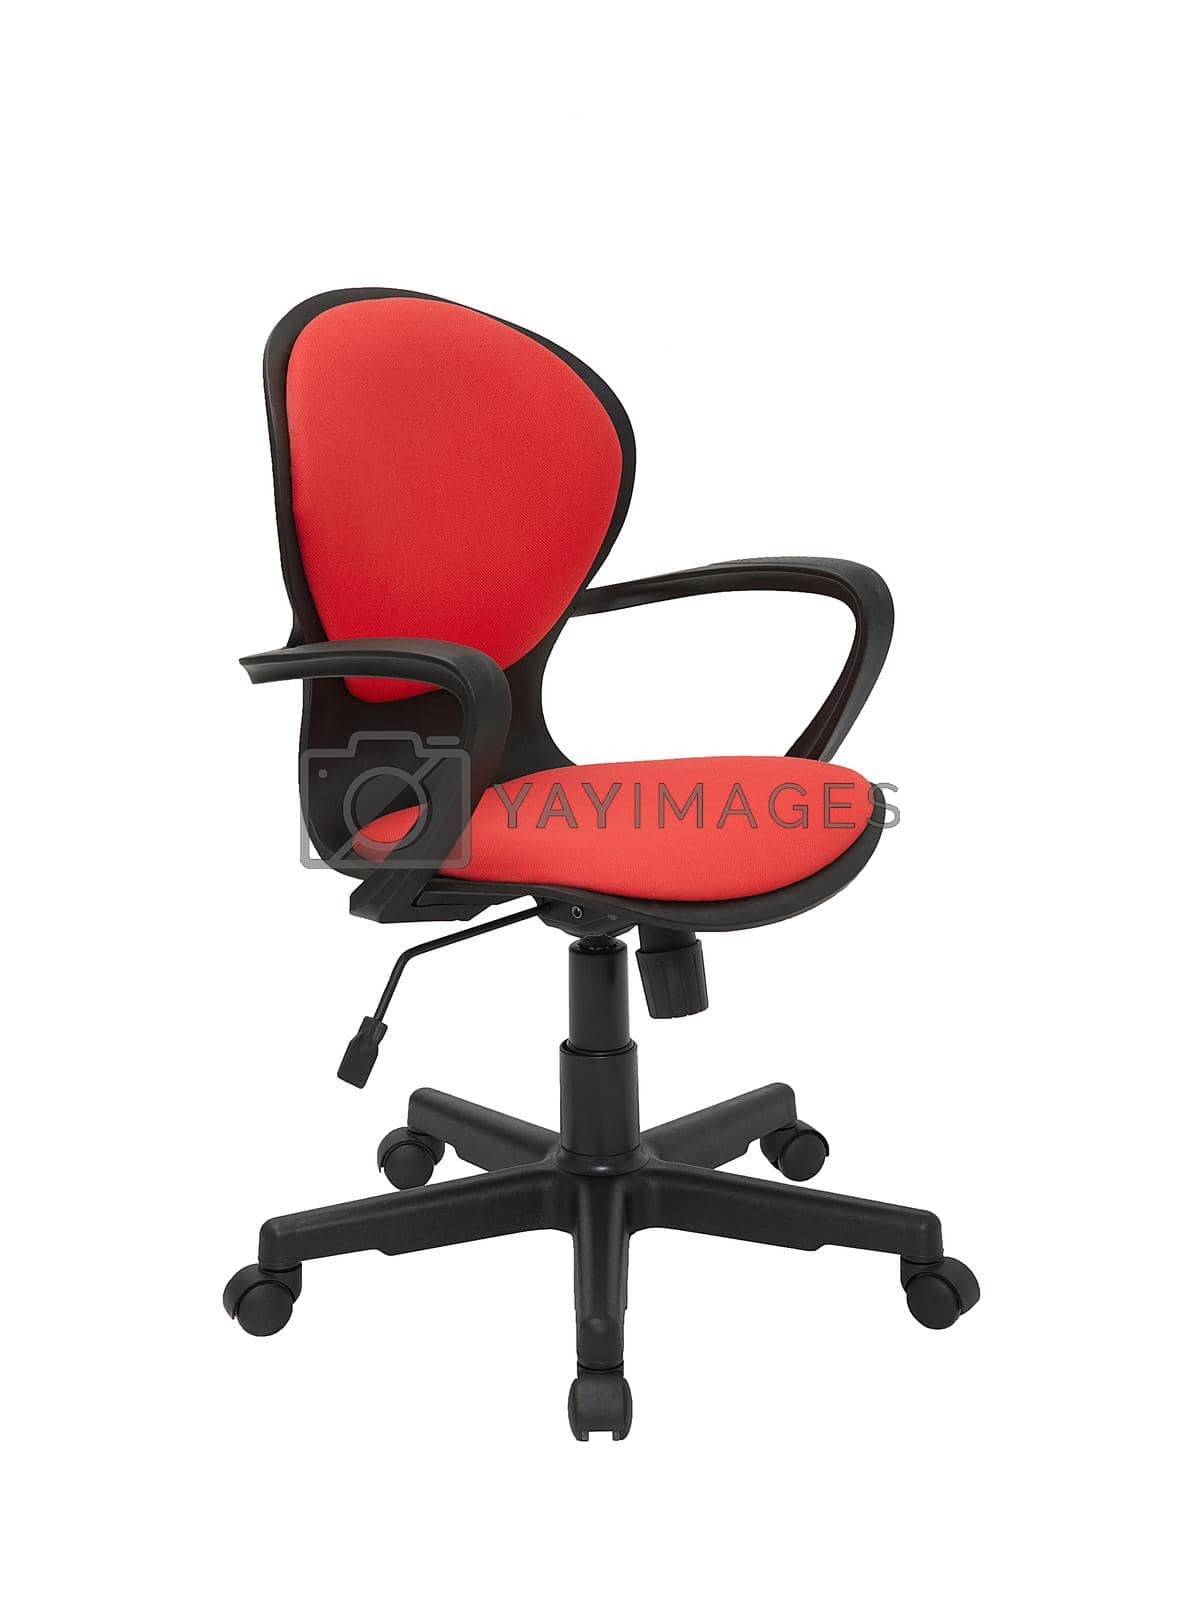 Royalty free image of red office fabric armchair on wheels isolated on white background, side view by artemzatsepilin